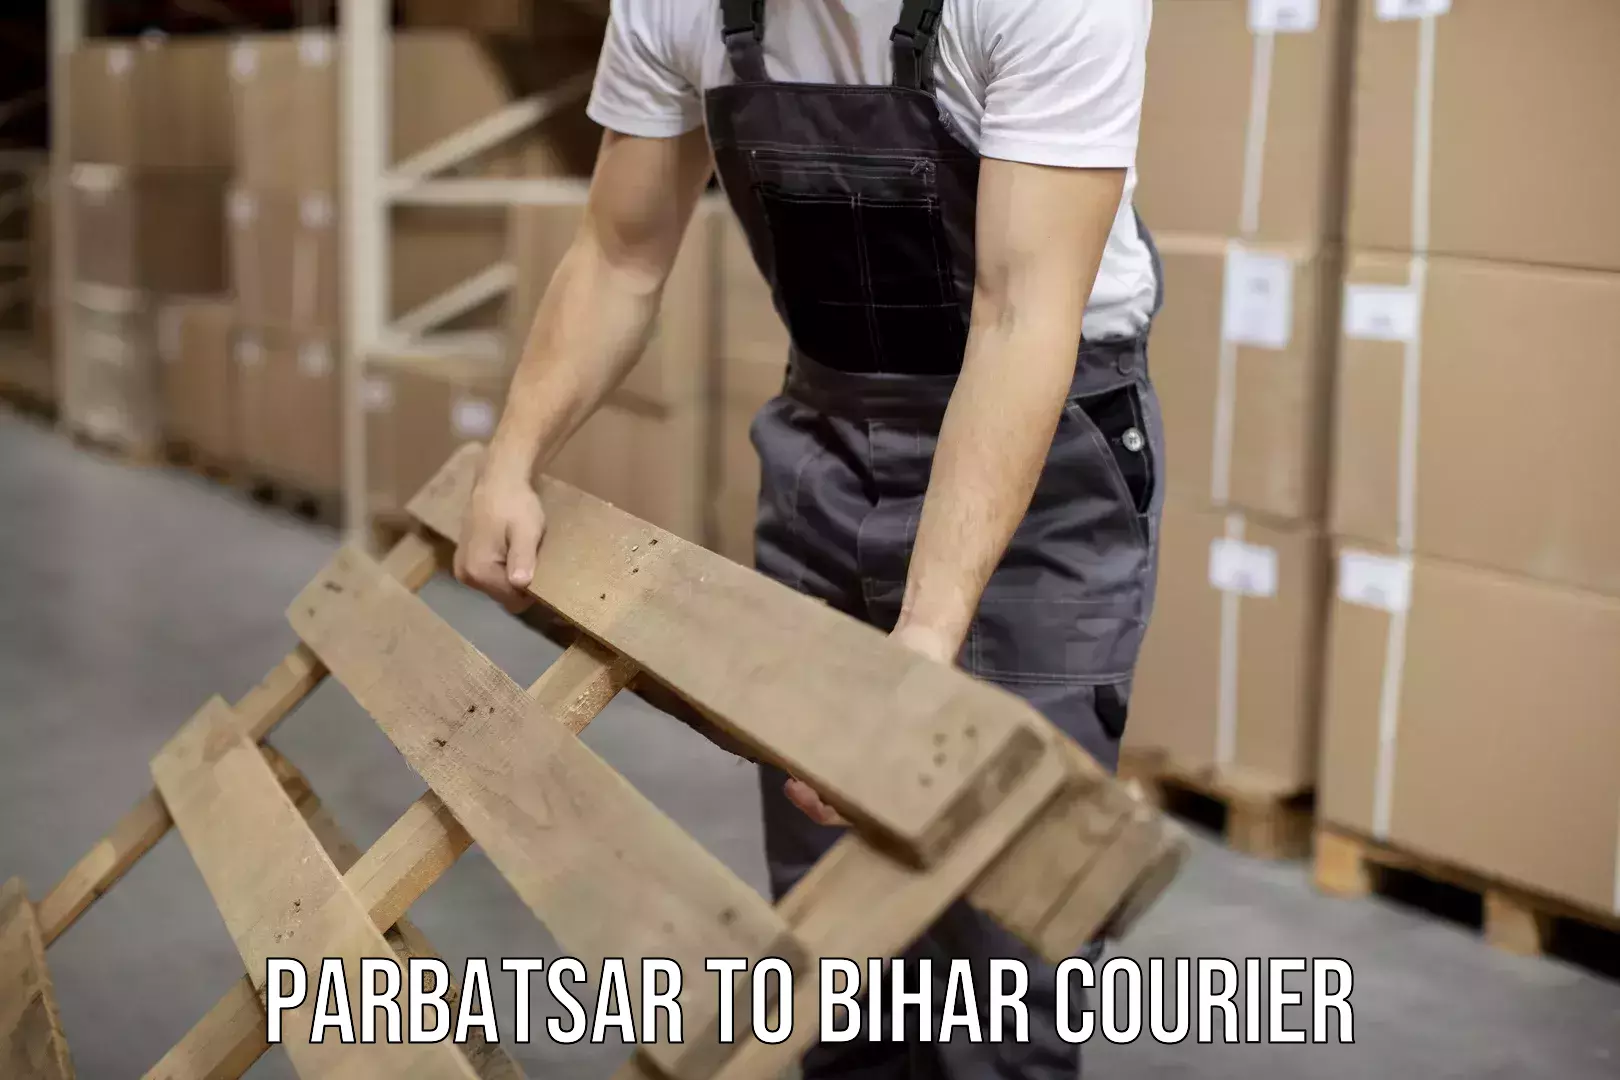 Courier dispatch services Parbatsar to Dhaka